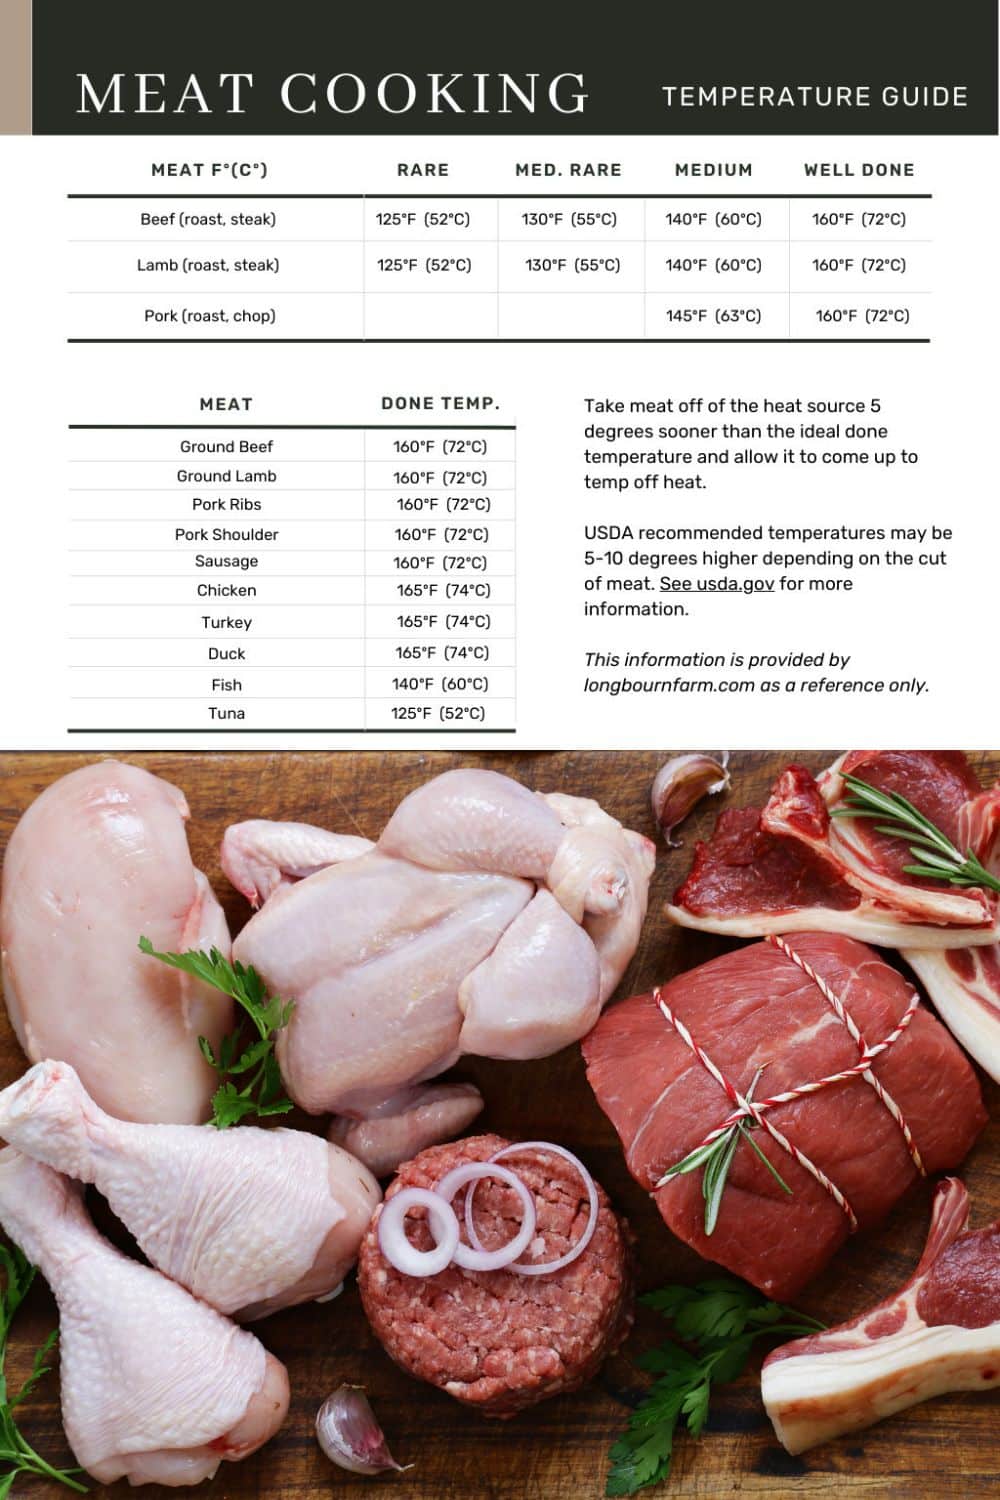 Meat cooking temperatures matter! Find out why, get my favorite thermometer and print out a handy chart to keep in your kitchen as a reference!